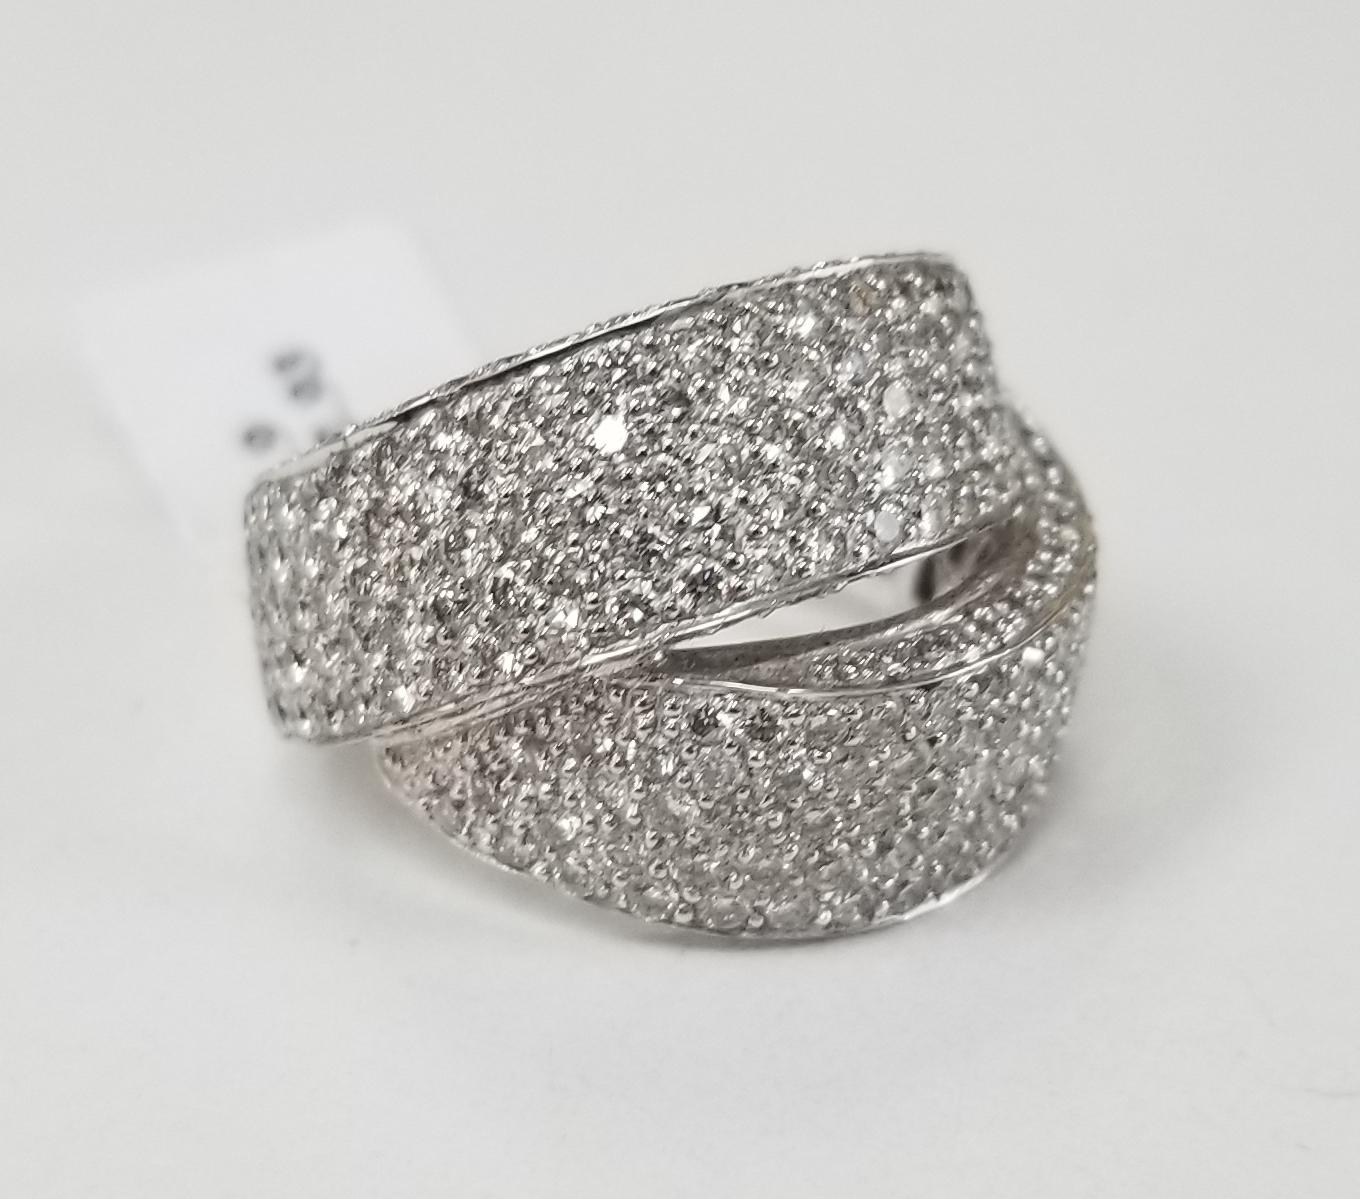 18 karat white gold diamond pave' ring, containing 261 round full cut diamonds of very fine quality weighing 2.93cts. ring size is 6.5 and is 17mm wide. 